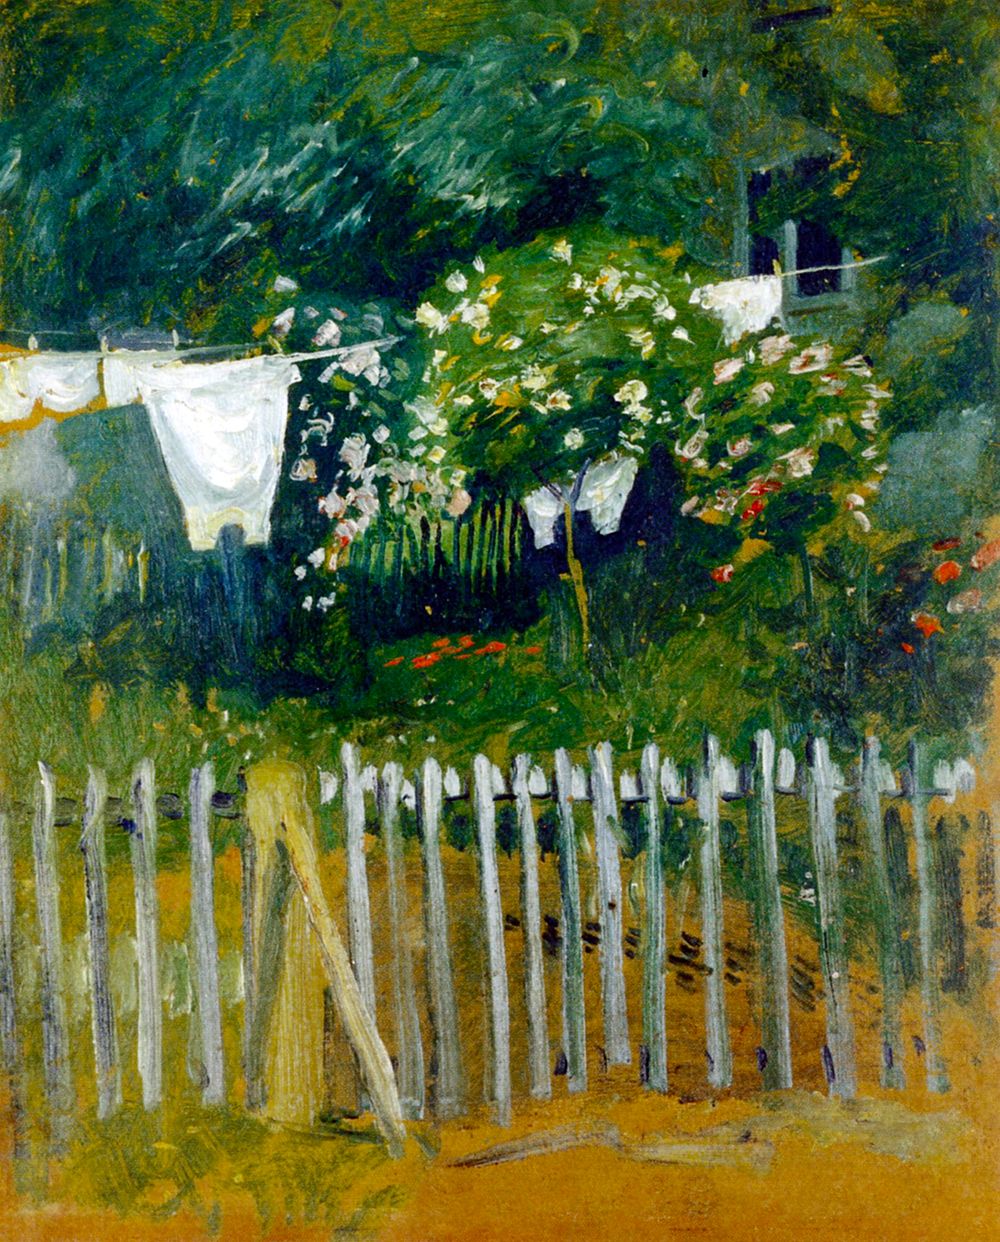 August Macke's Laundry in the garden in Kandern (1907) famous painting. Original from Wikimedia Commons. Digitally enhanced…